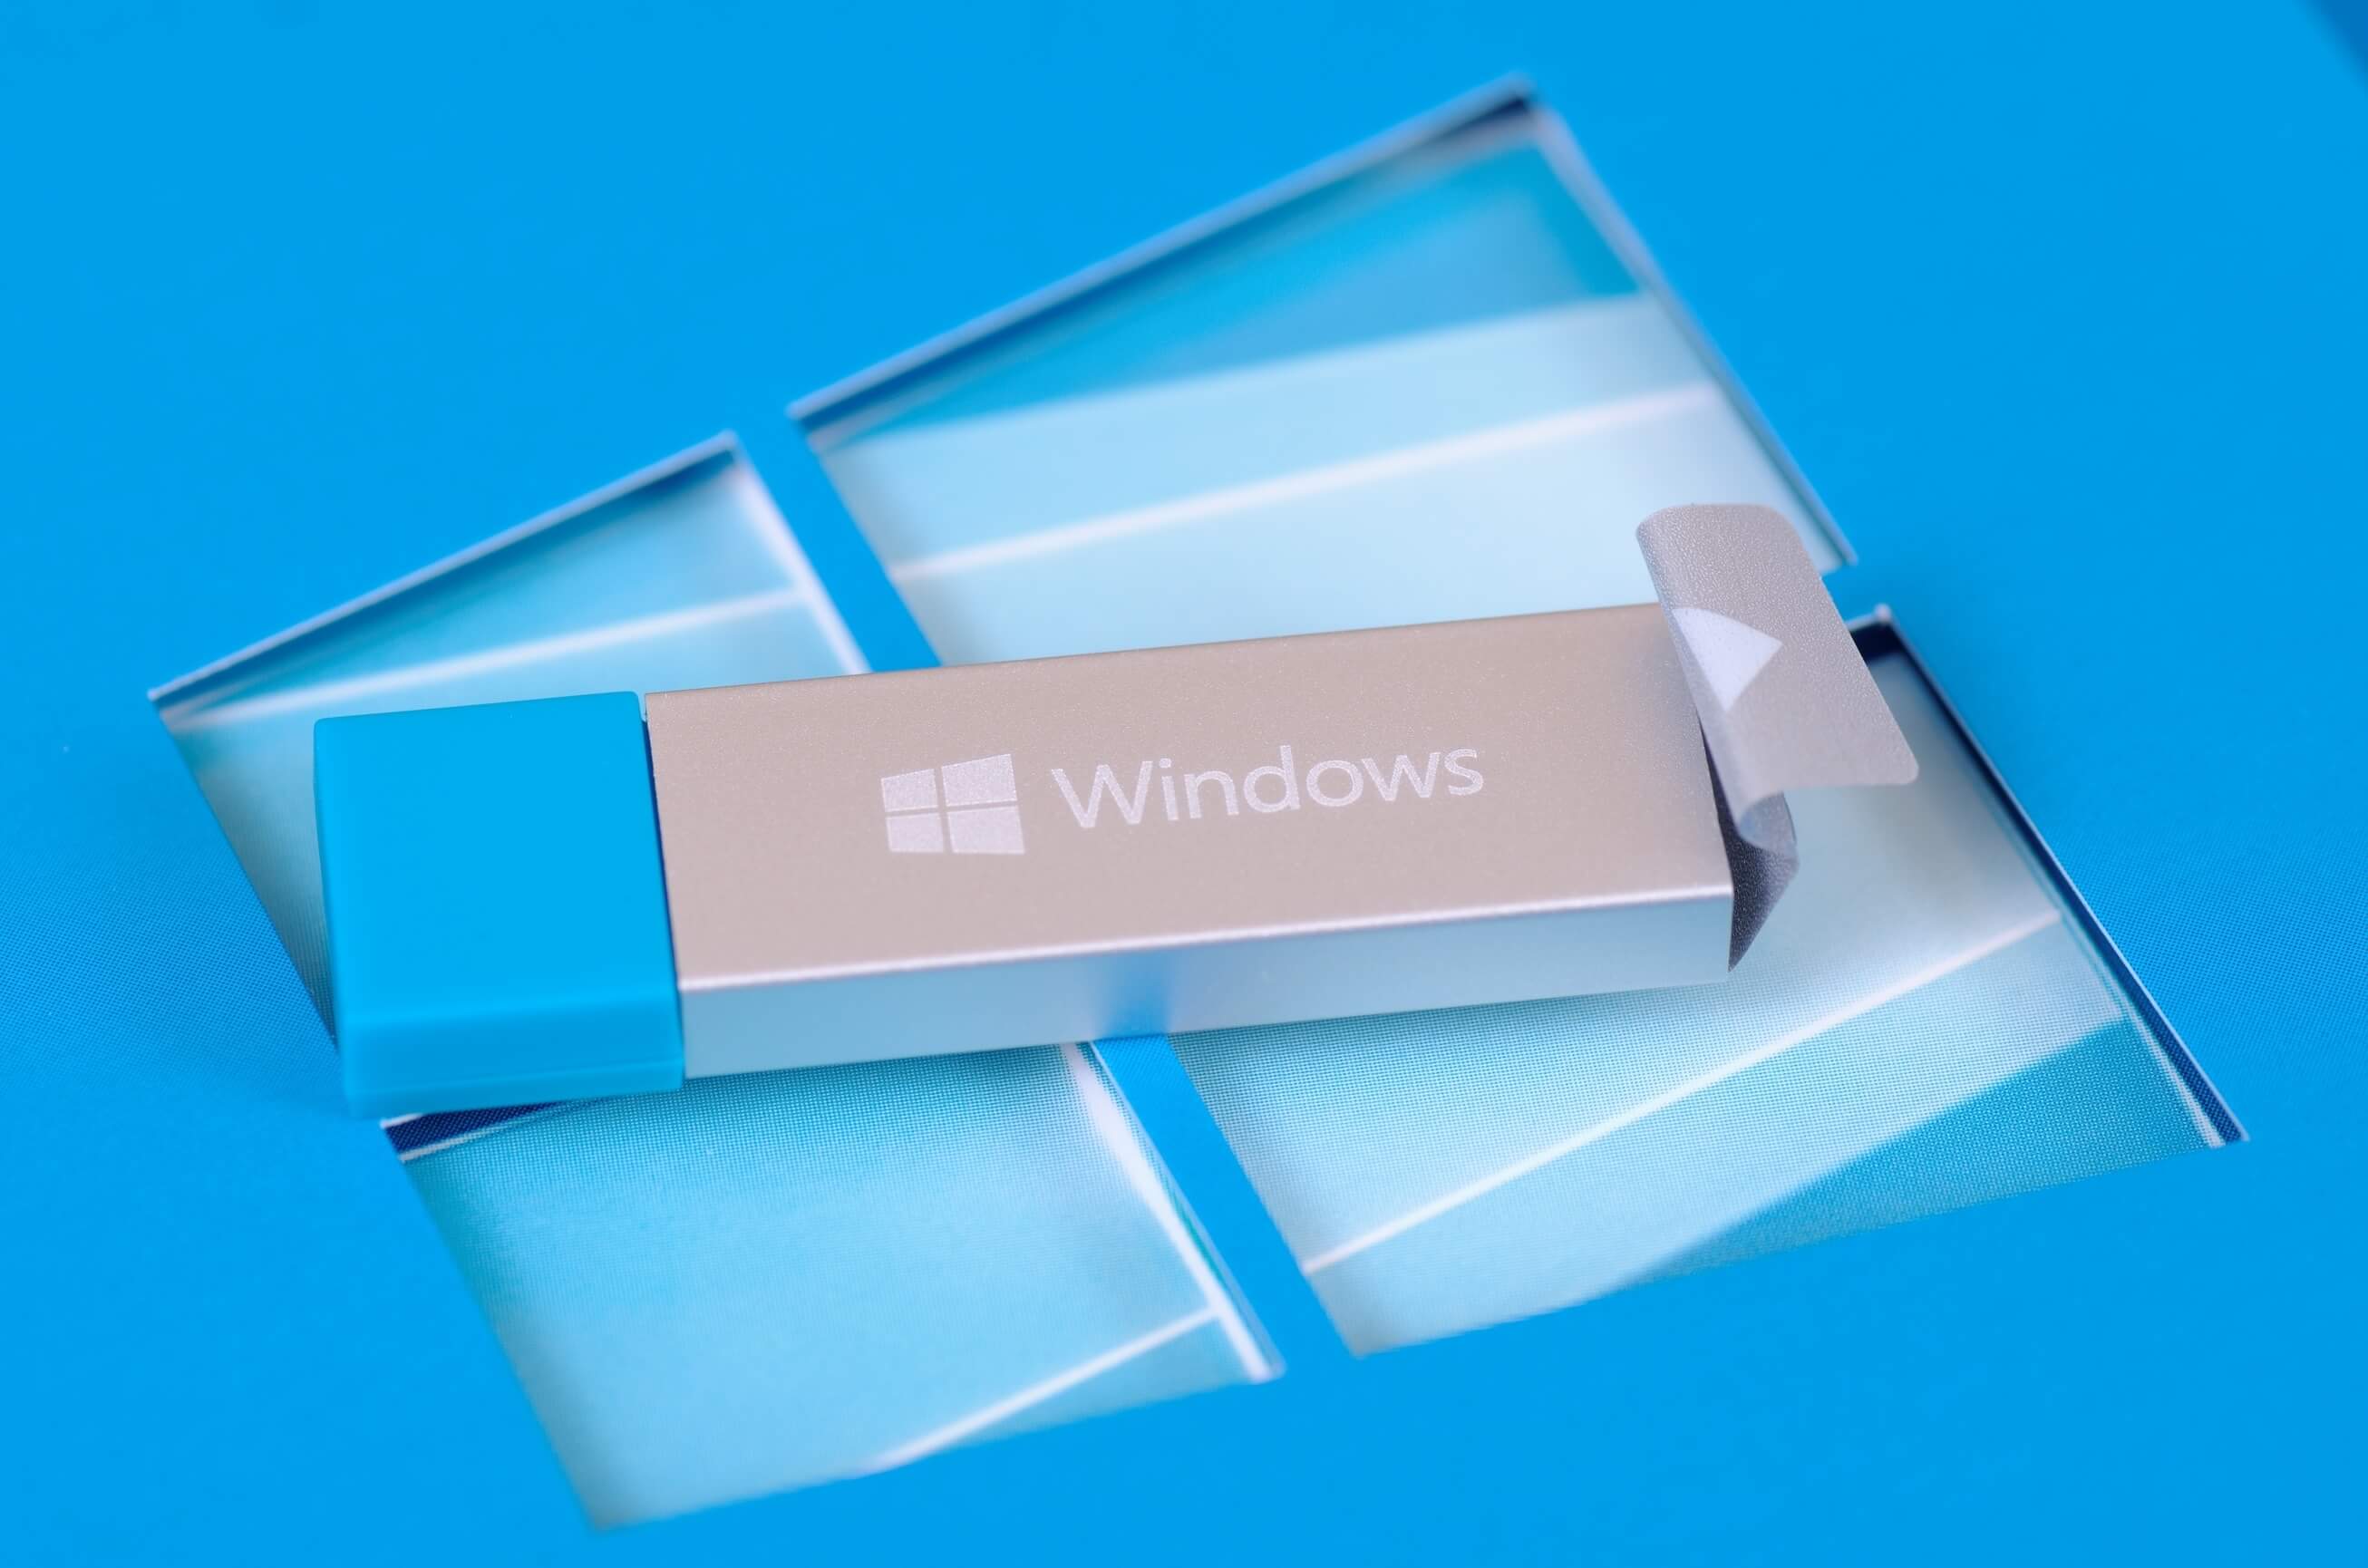 Windows 10 is now installed on 1.3 billion monthly active devices